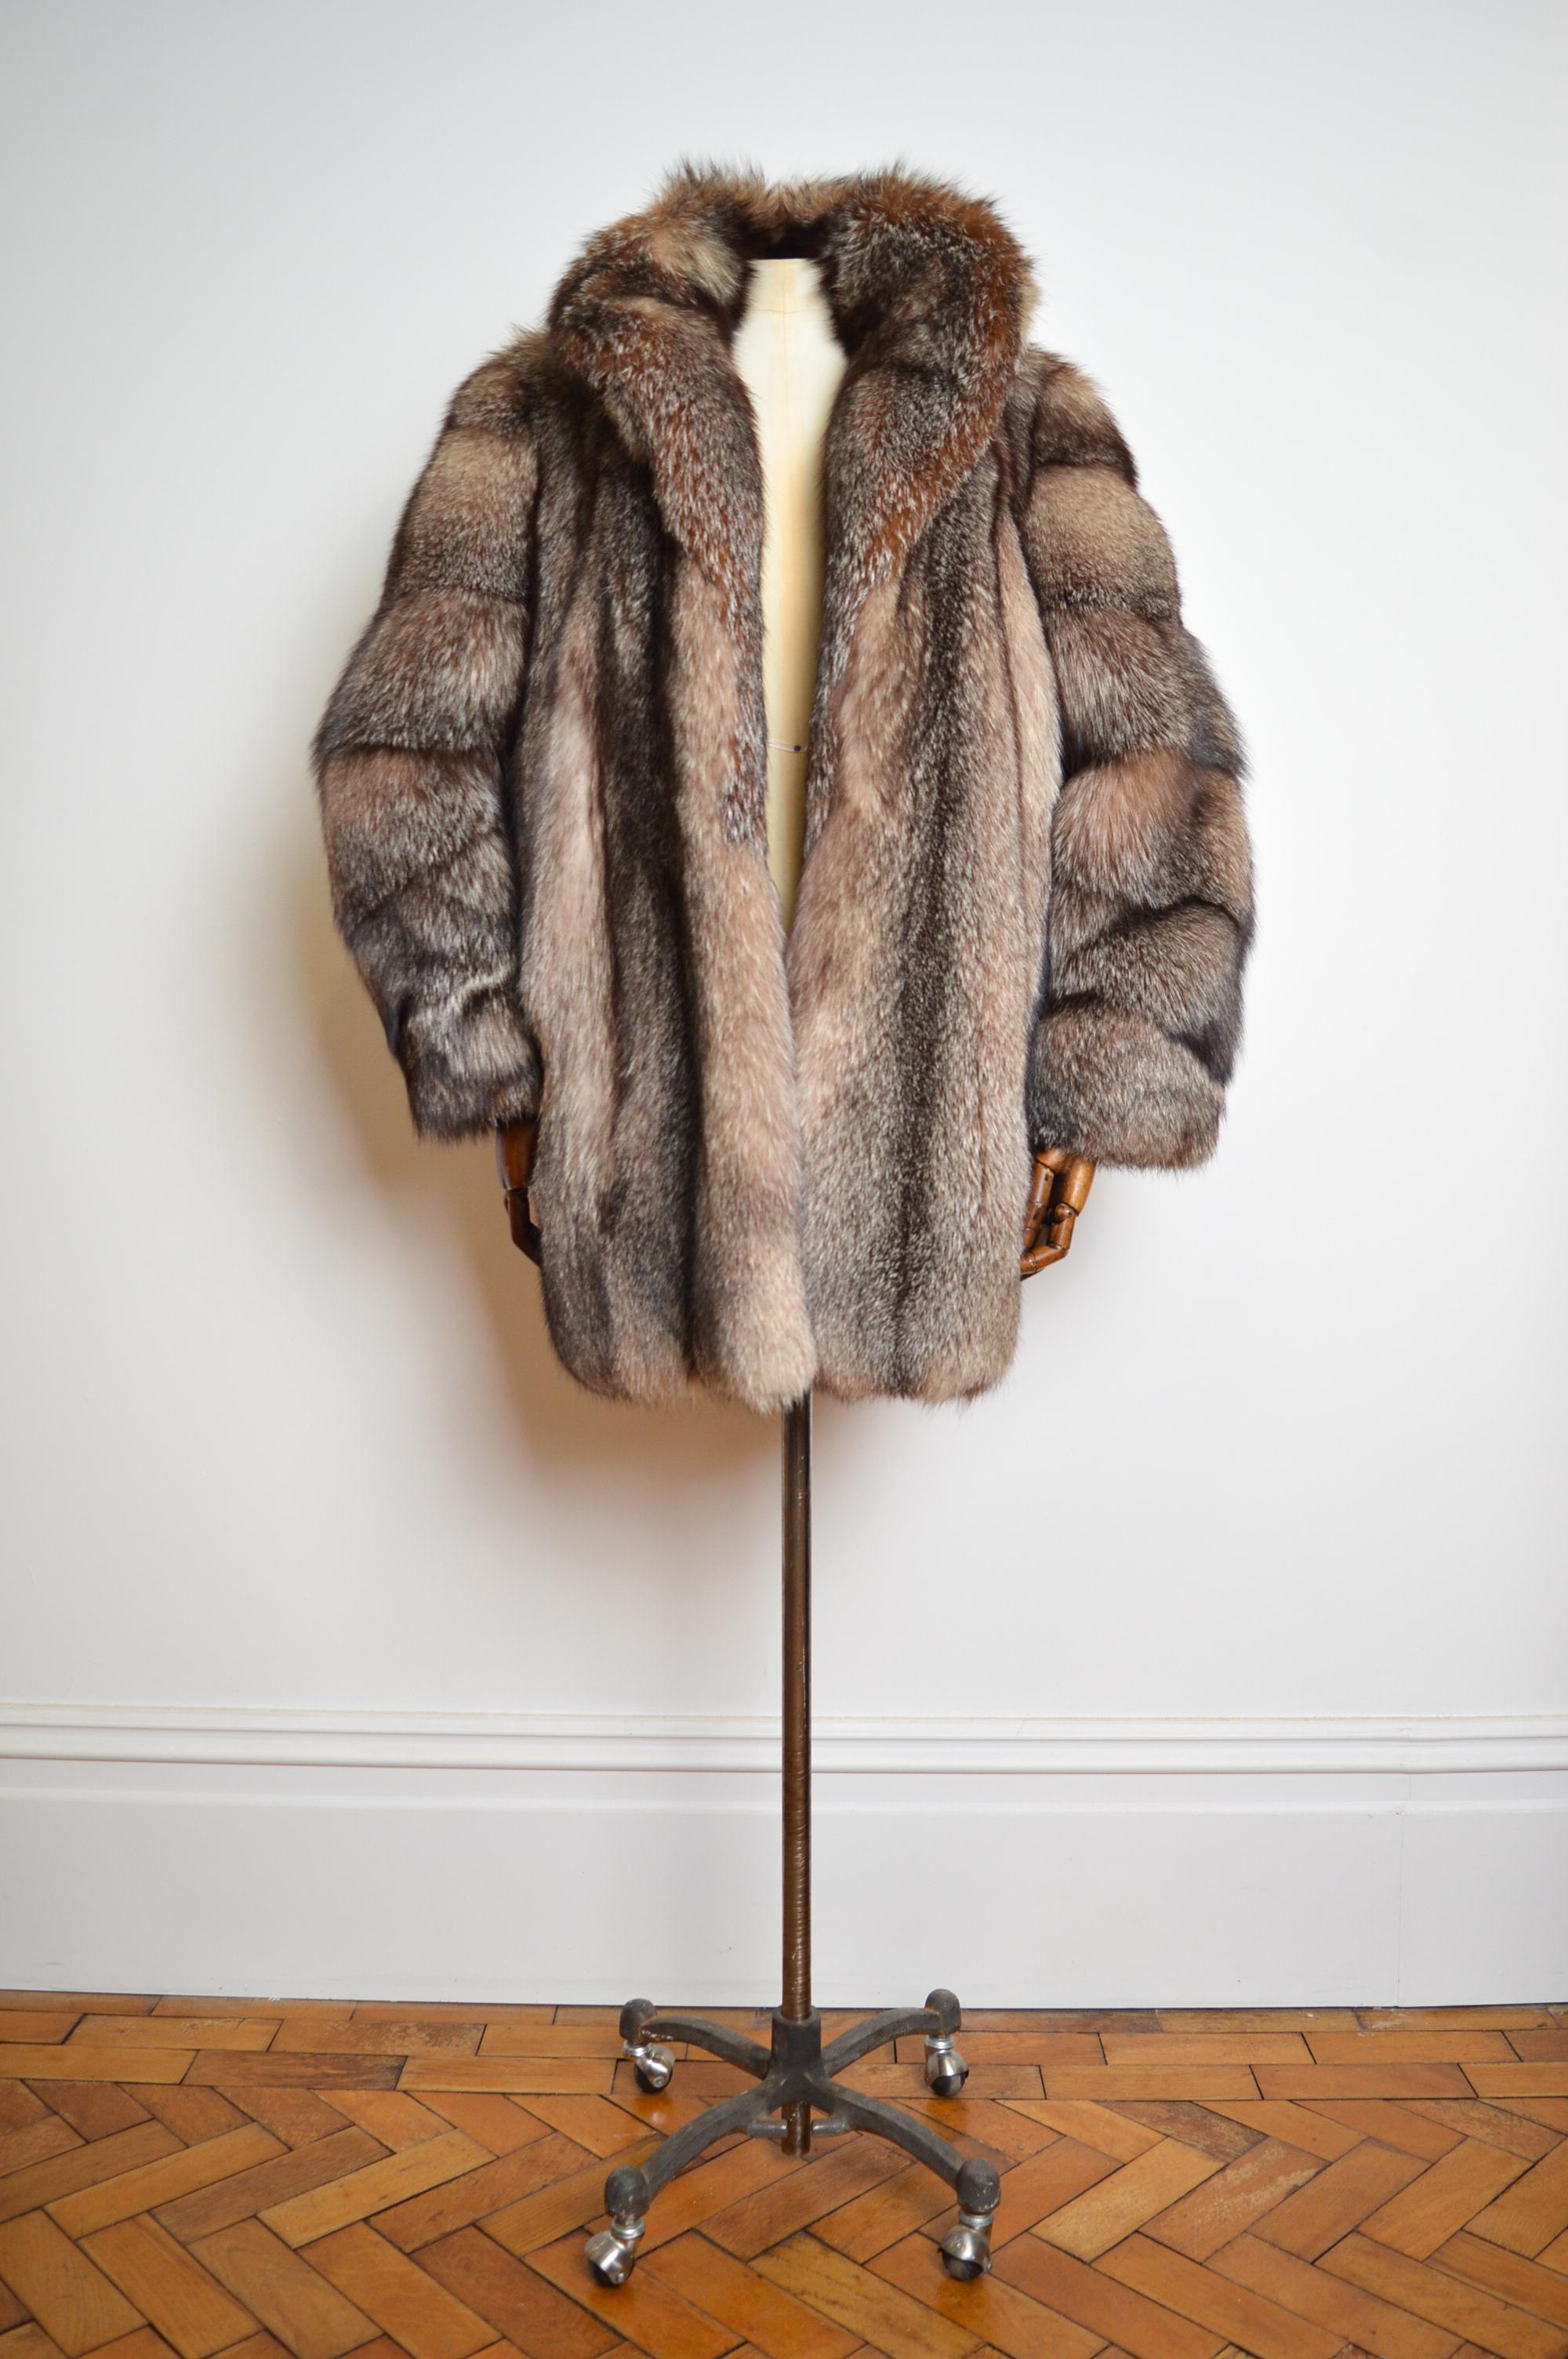 Incredible, Opulent Vintage 1970's Arctic Fox fur Coat in Silvery Brown Tones.  

This exceptional Vintage Fur Jacket features extremely Plush, thick Pelts of soft Natural Arctic Fox (Vulpes Lagopus), Hip Pockets pockets, Interior Pocket, central